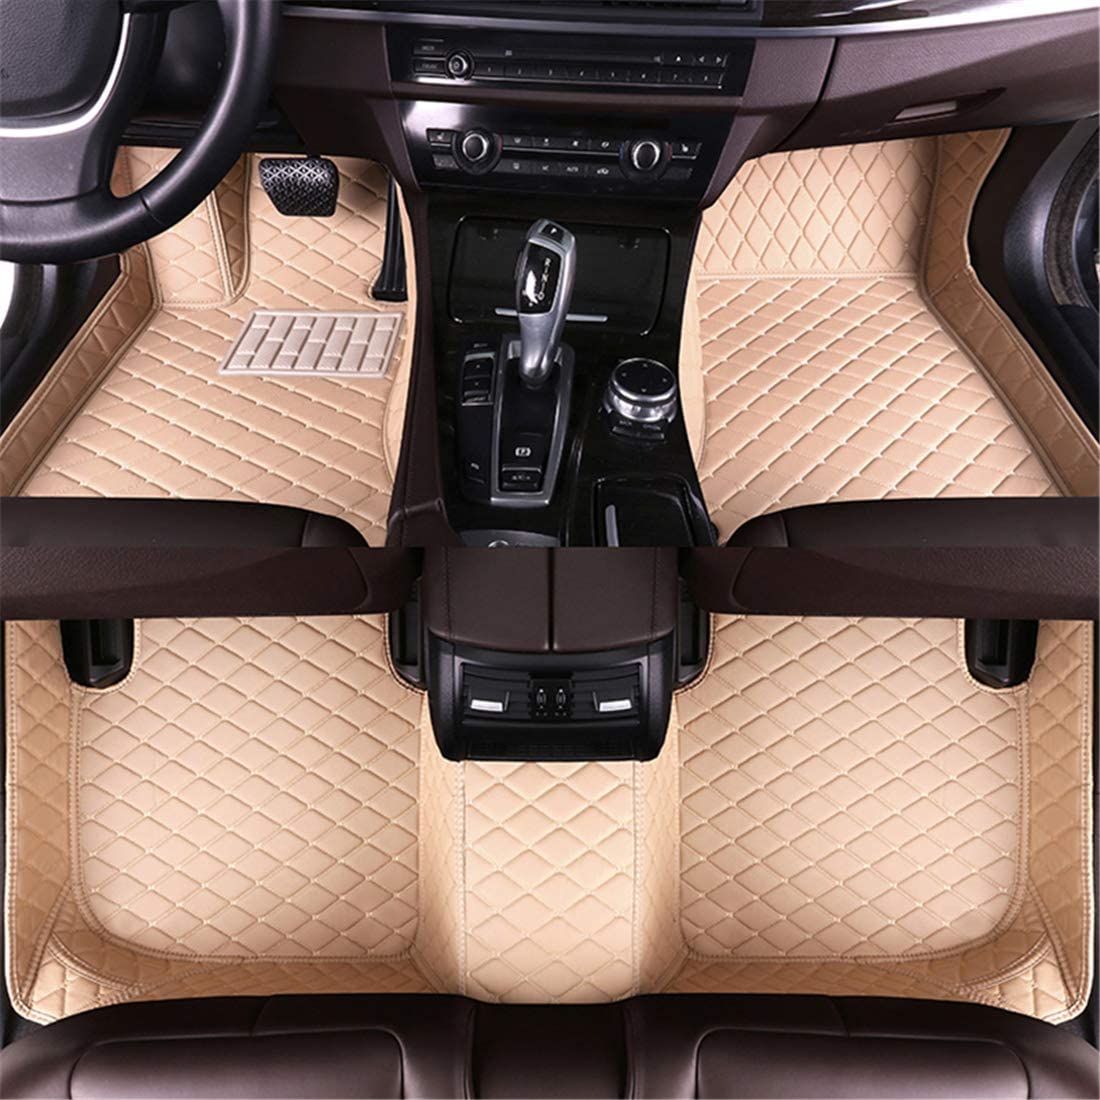 Car Floor Mats fit for E-PACE 2018-2019 Full Coverage All Weather Protection Non-Slip Leather Floor Liners - Delicate Leather